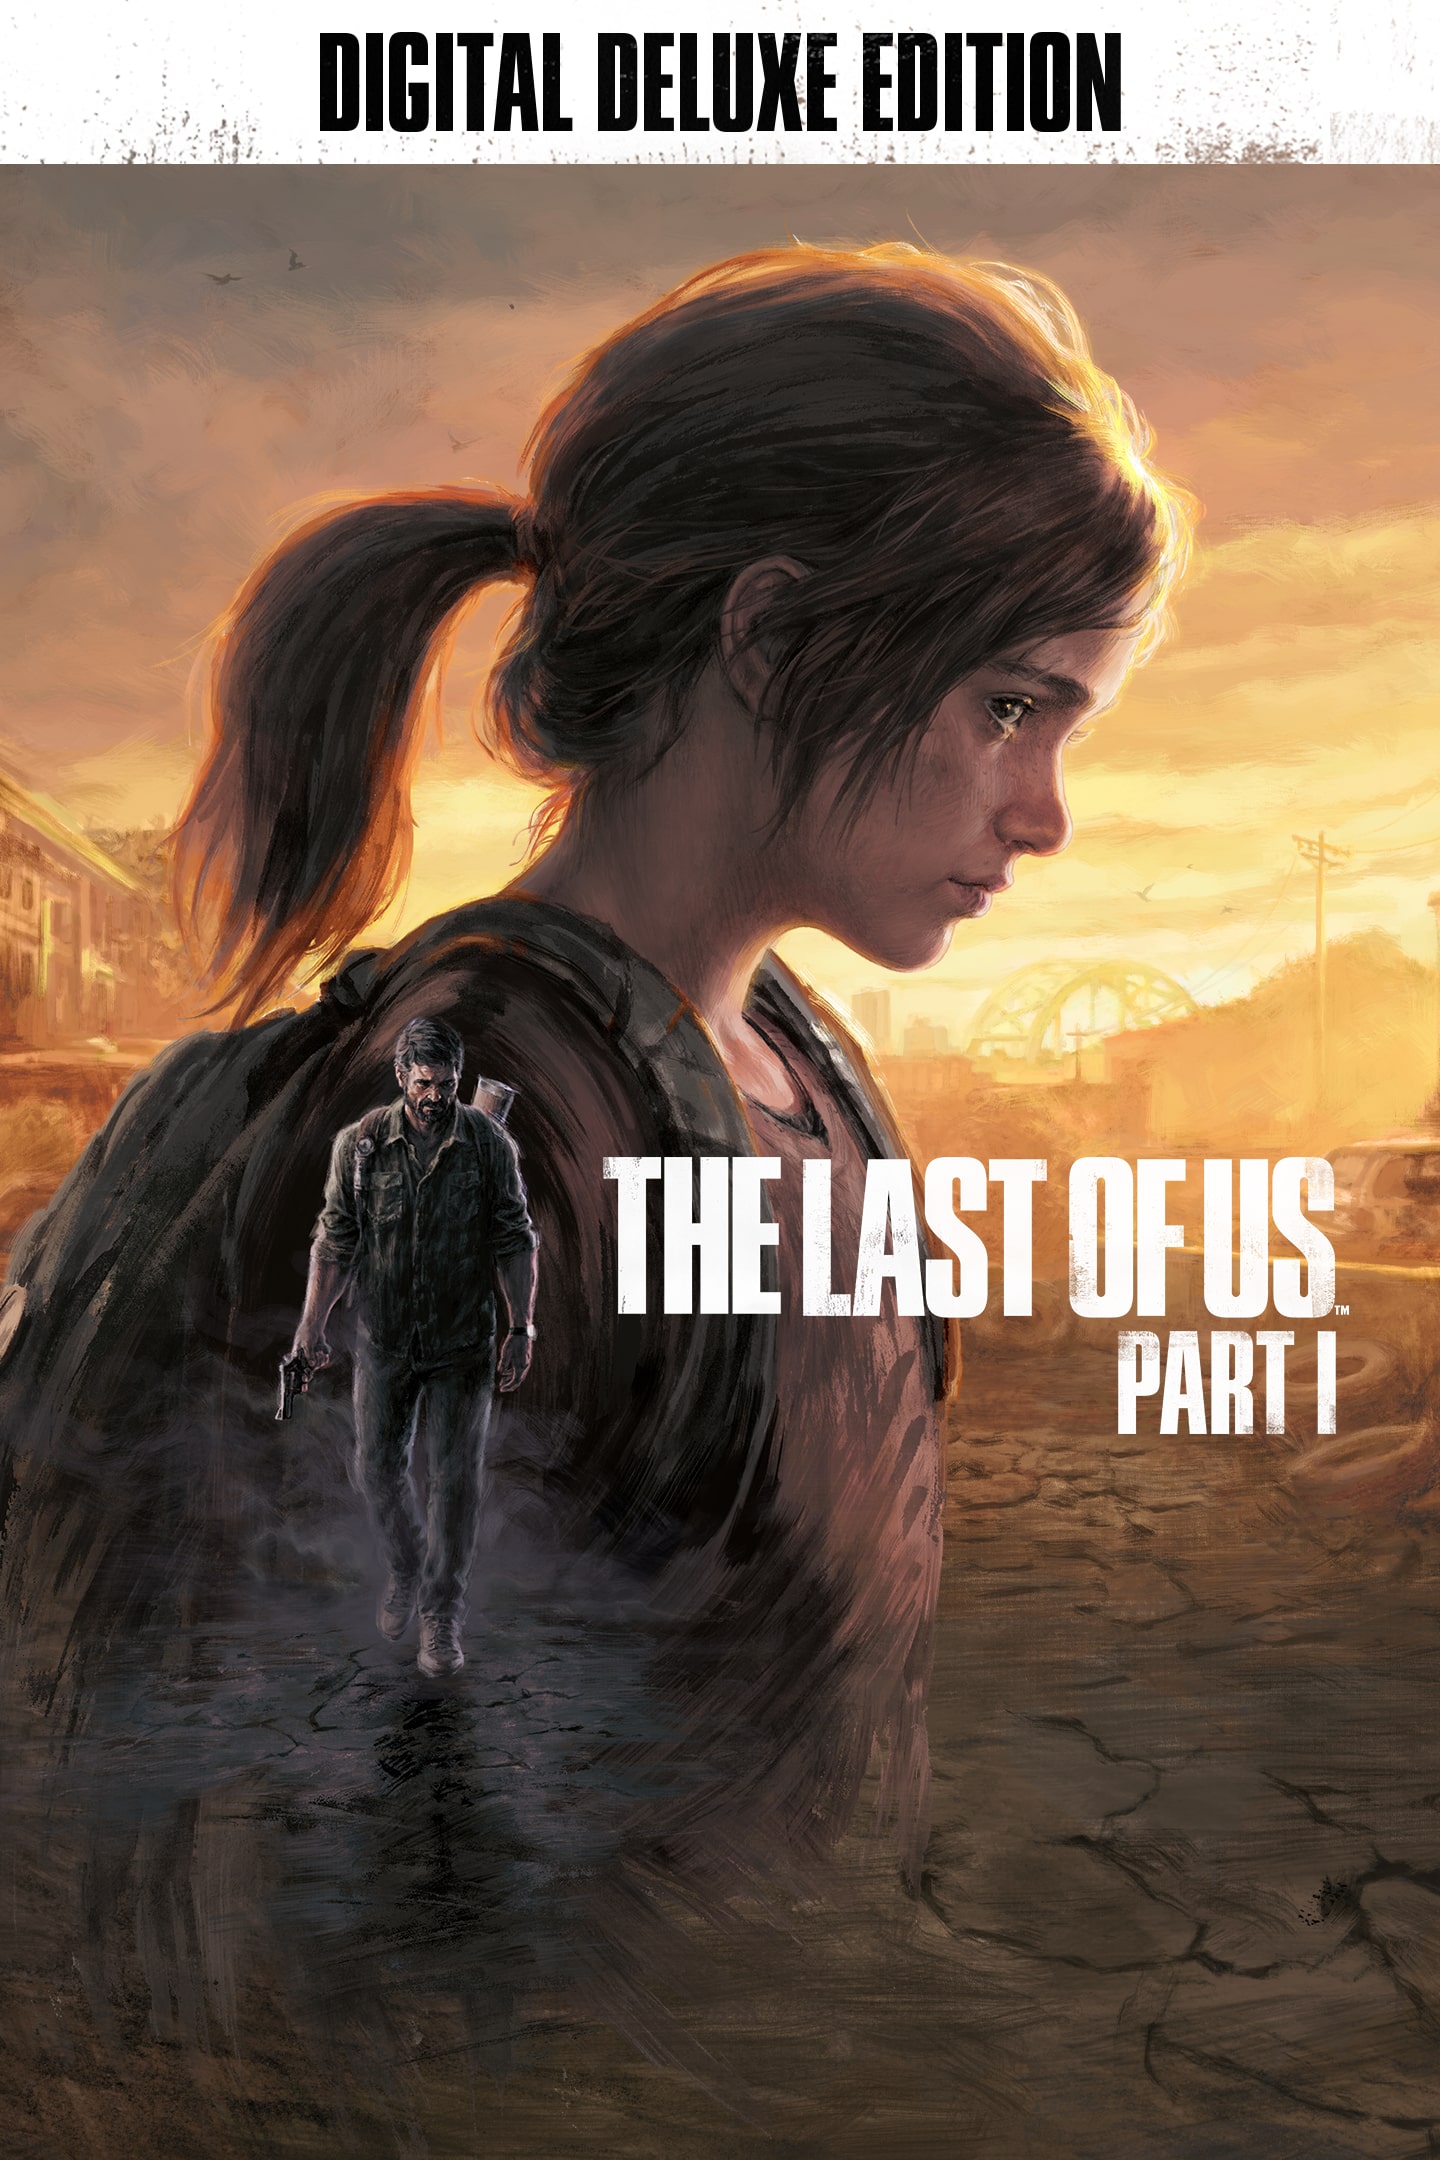 The Last of Us - streaming tv show online